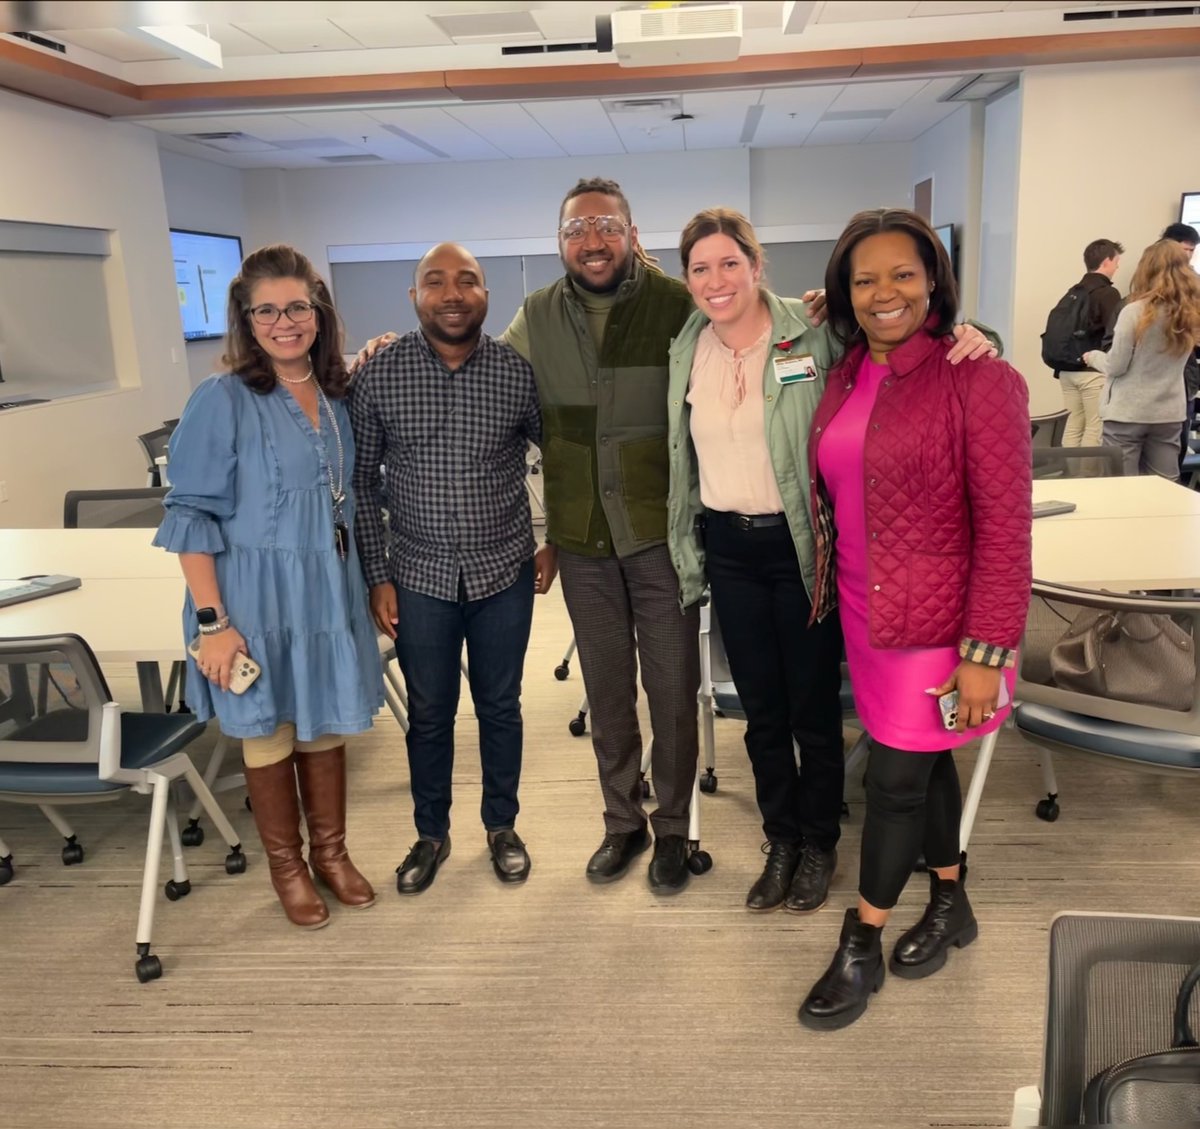 Enjoyed having Dr. Brian Marshall, CEO of MashUp! Nashville and OHE alumni, speak to our Foundations of Health Equity class recently. Learn more about MashUp! Nashville: mashupnation.org/home